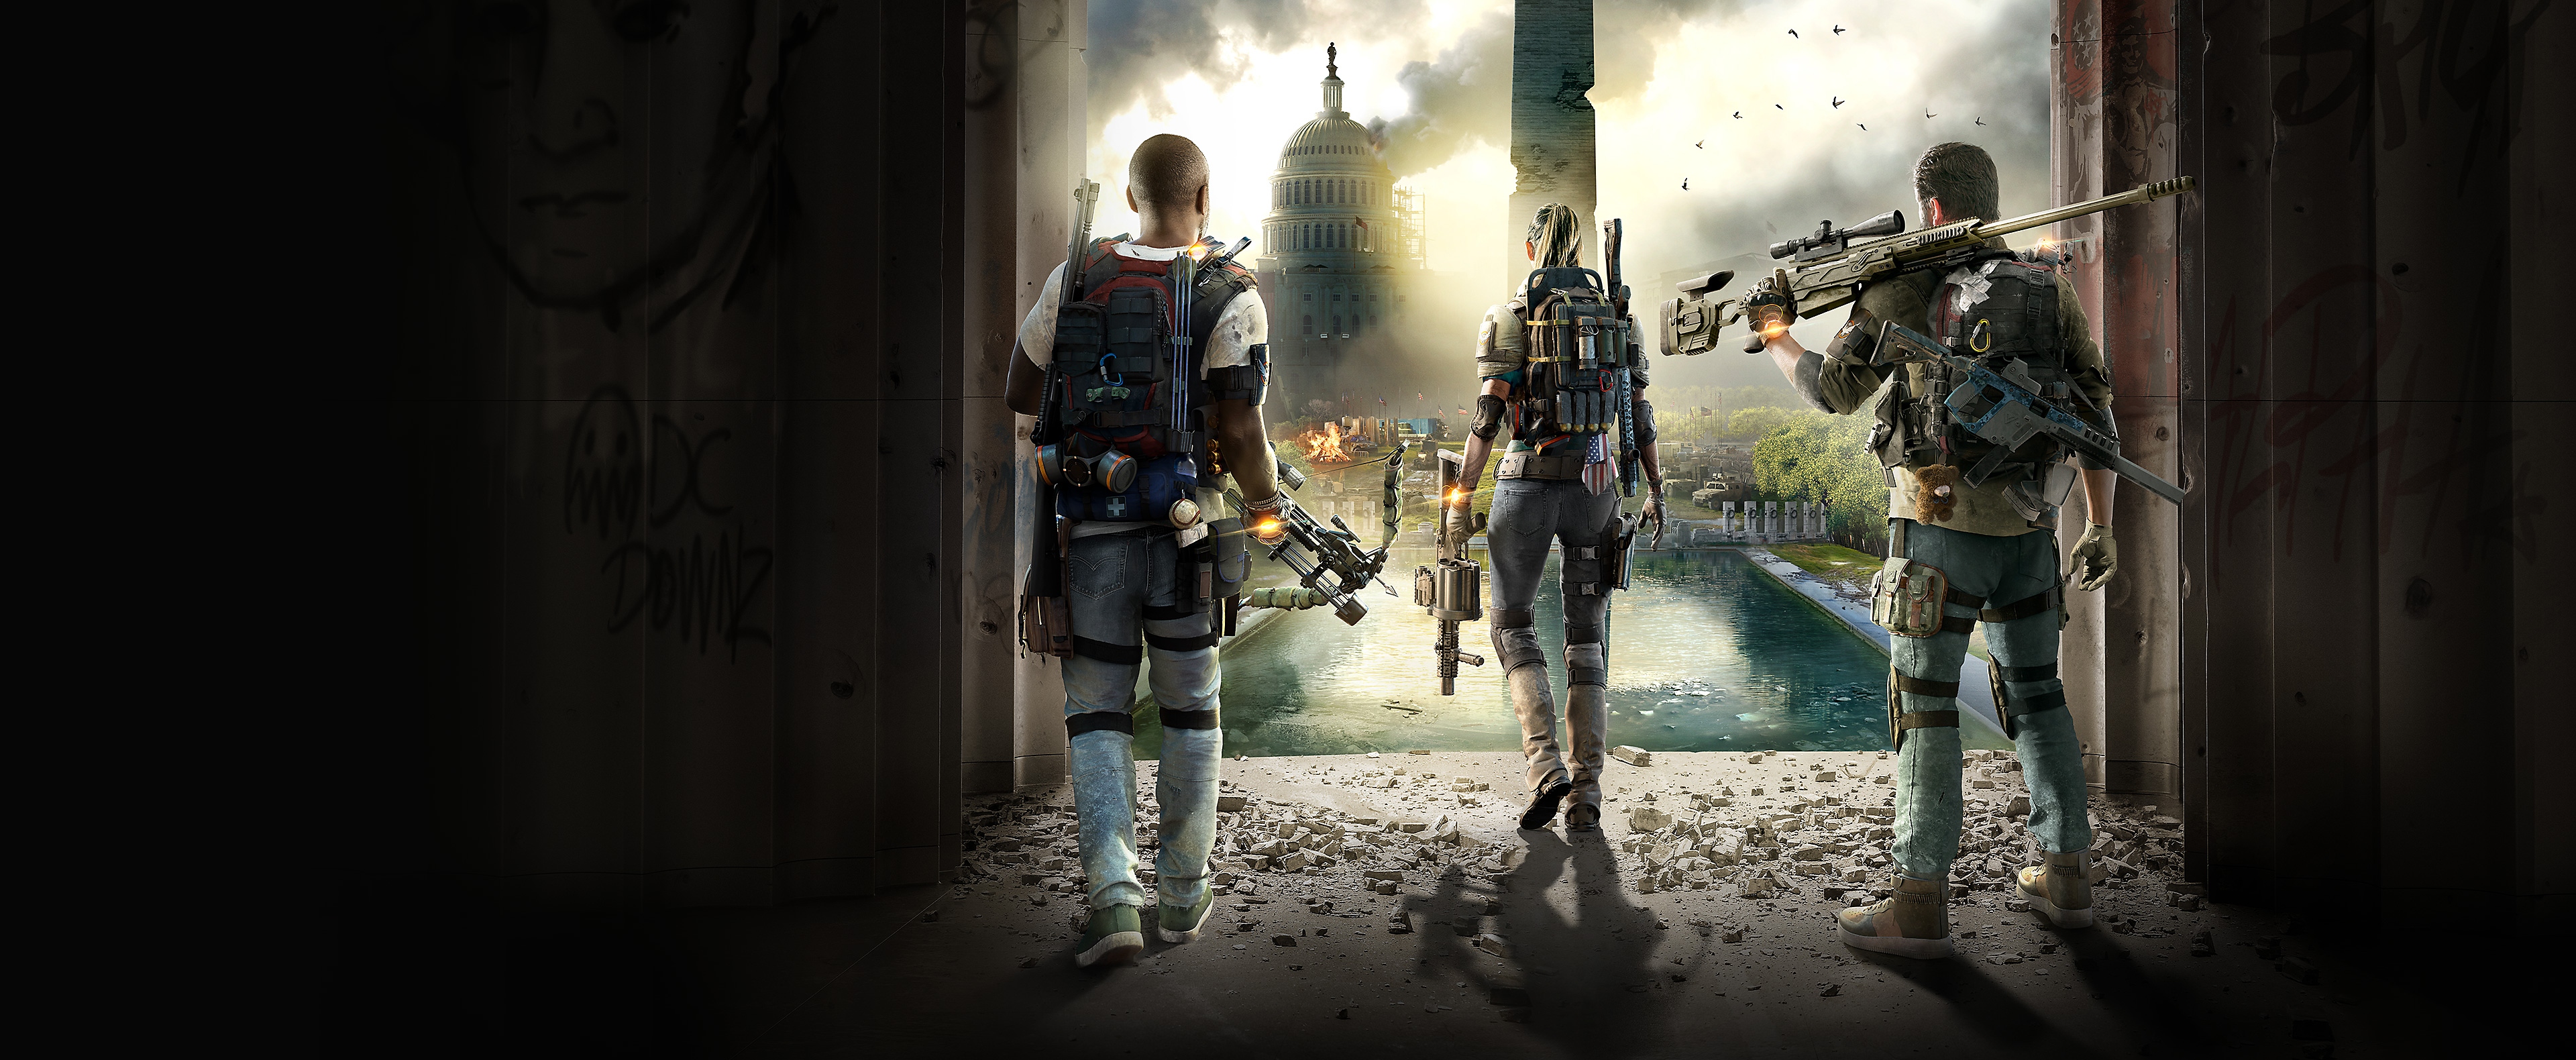 Tom Clancy's The Division 2